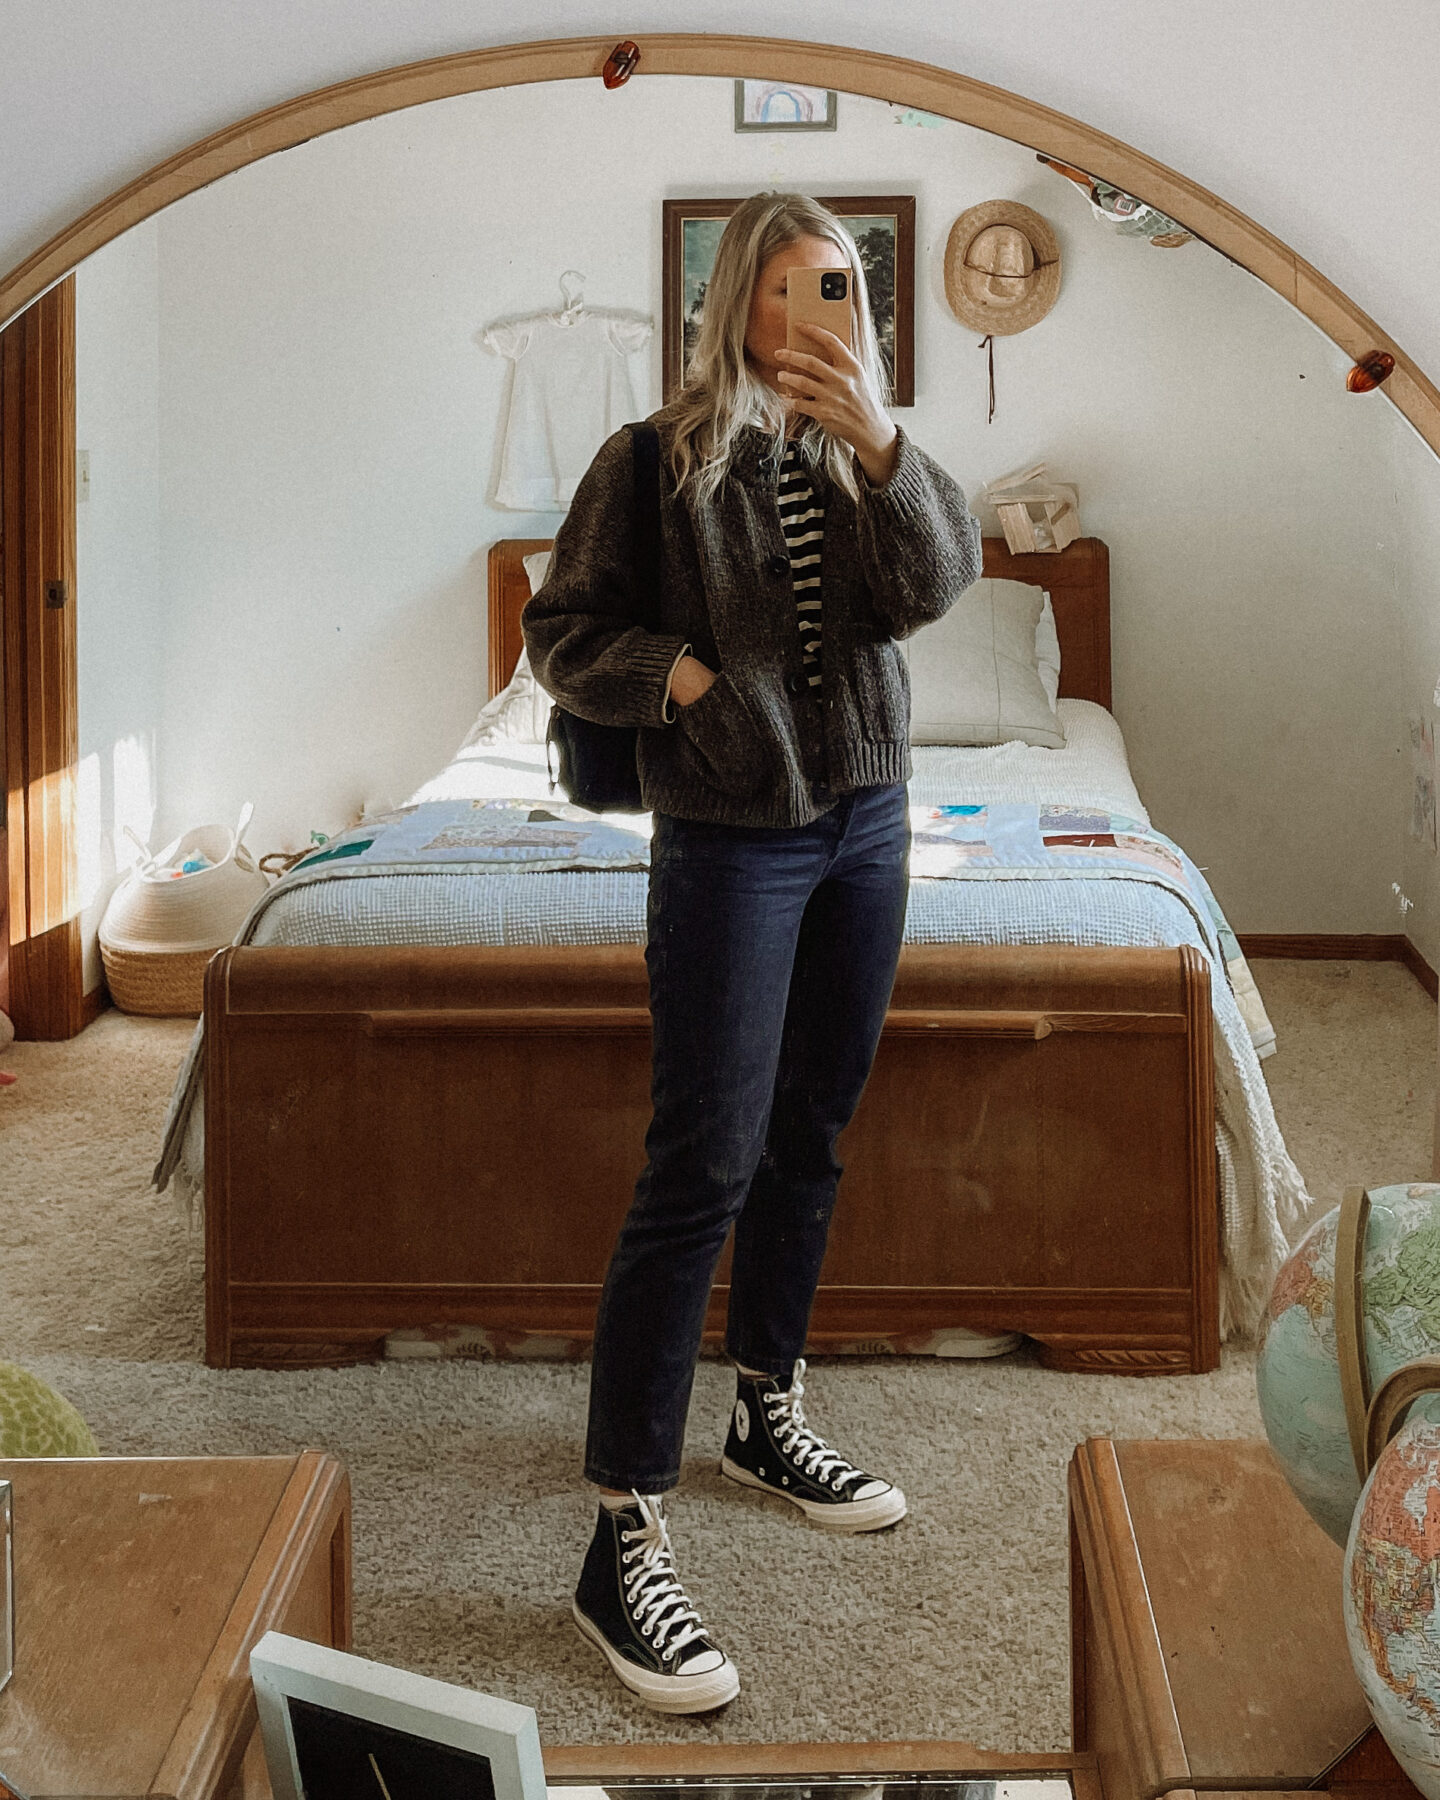 Karin Emily wears a Babaa cardigan no. 23, an everlane breton stripe long sleeve tee, black wash everlane 90's cheeky jeans, and a pair of black converse high top sneakers